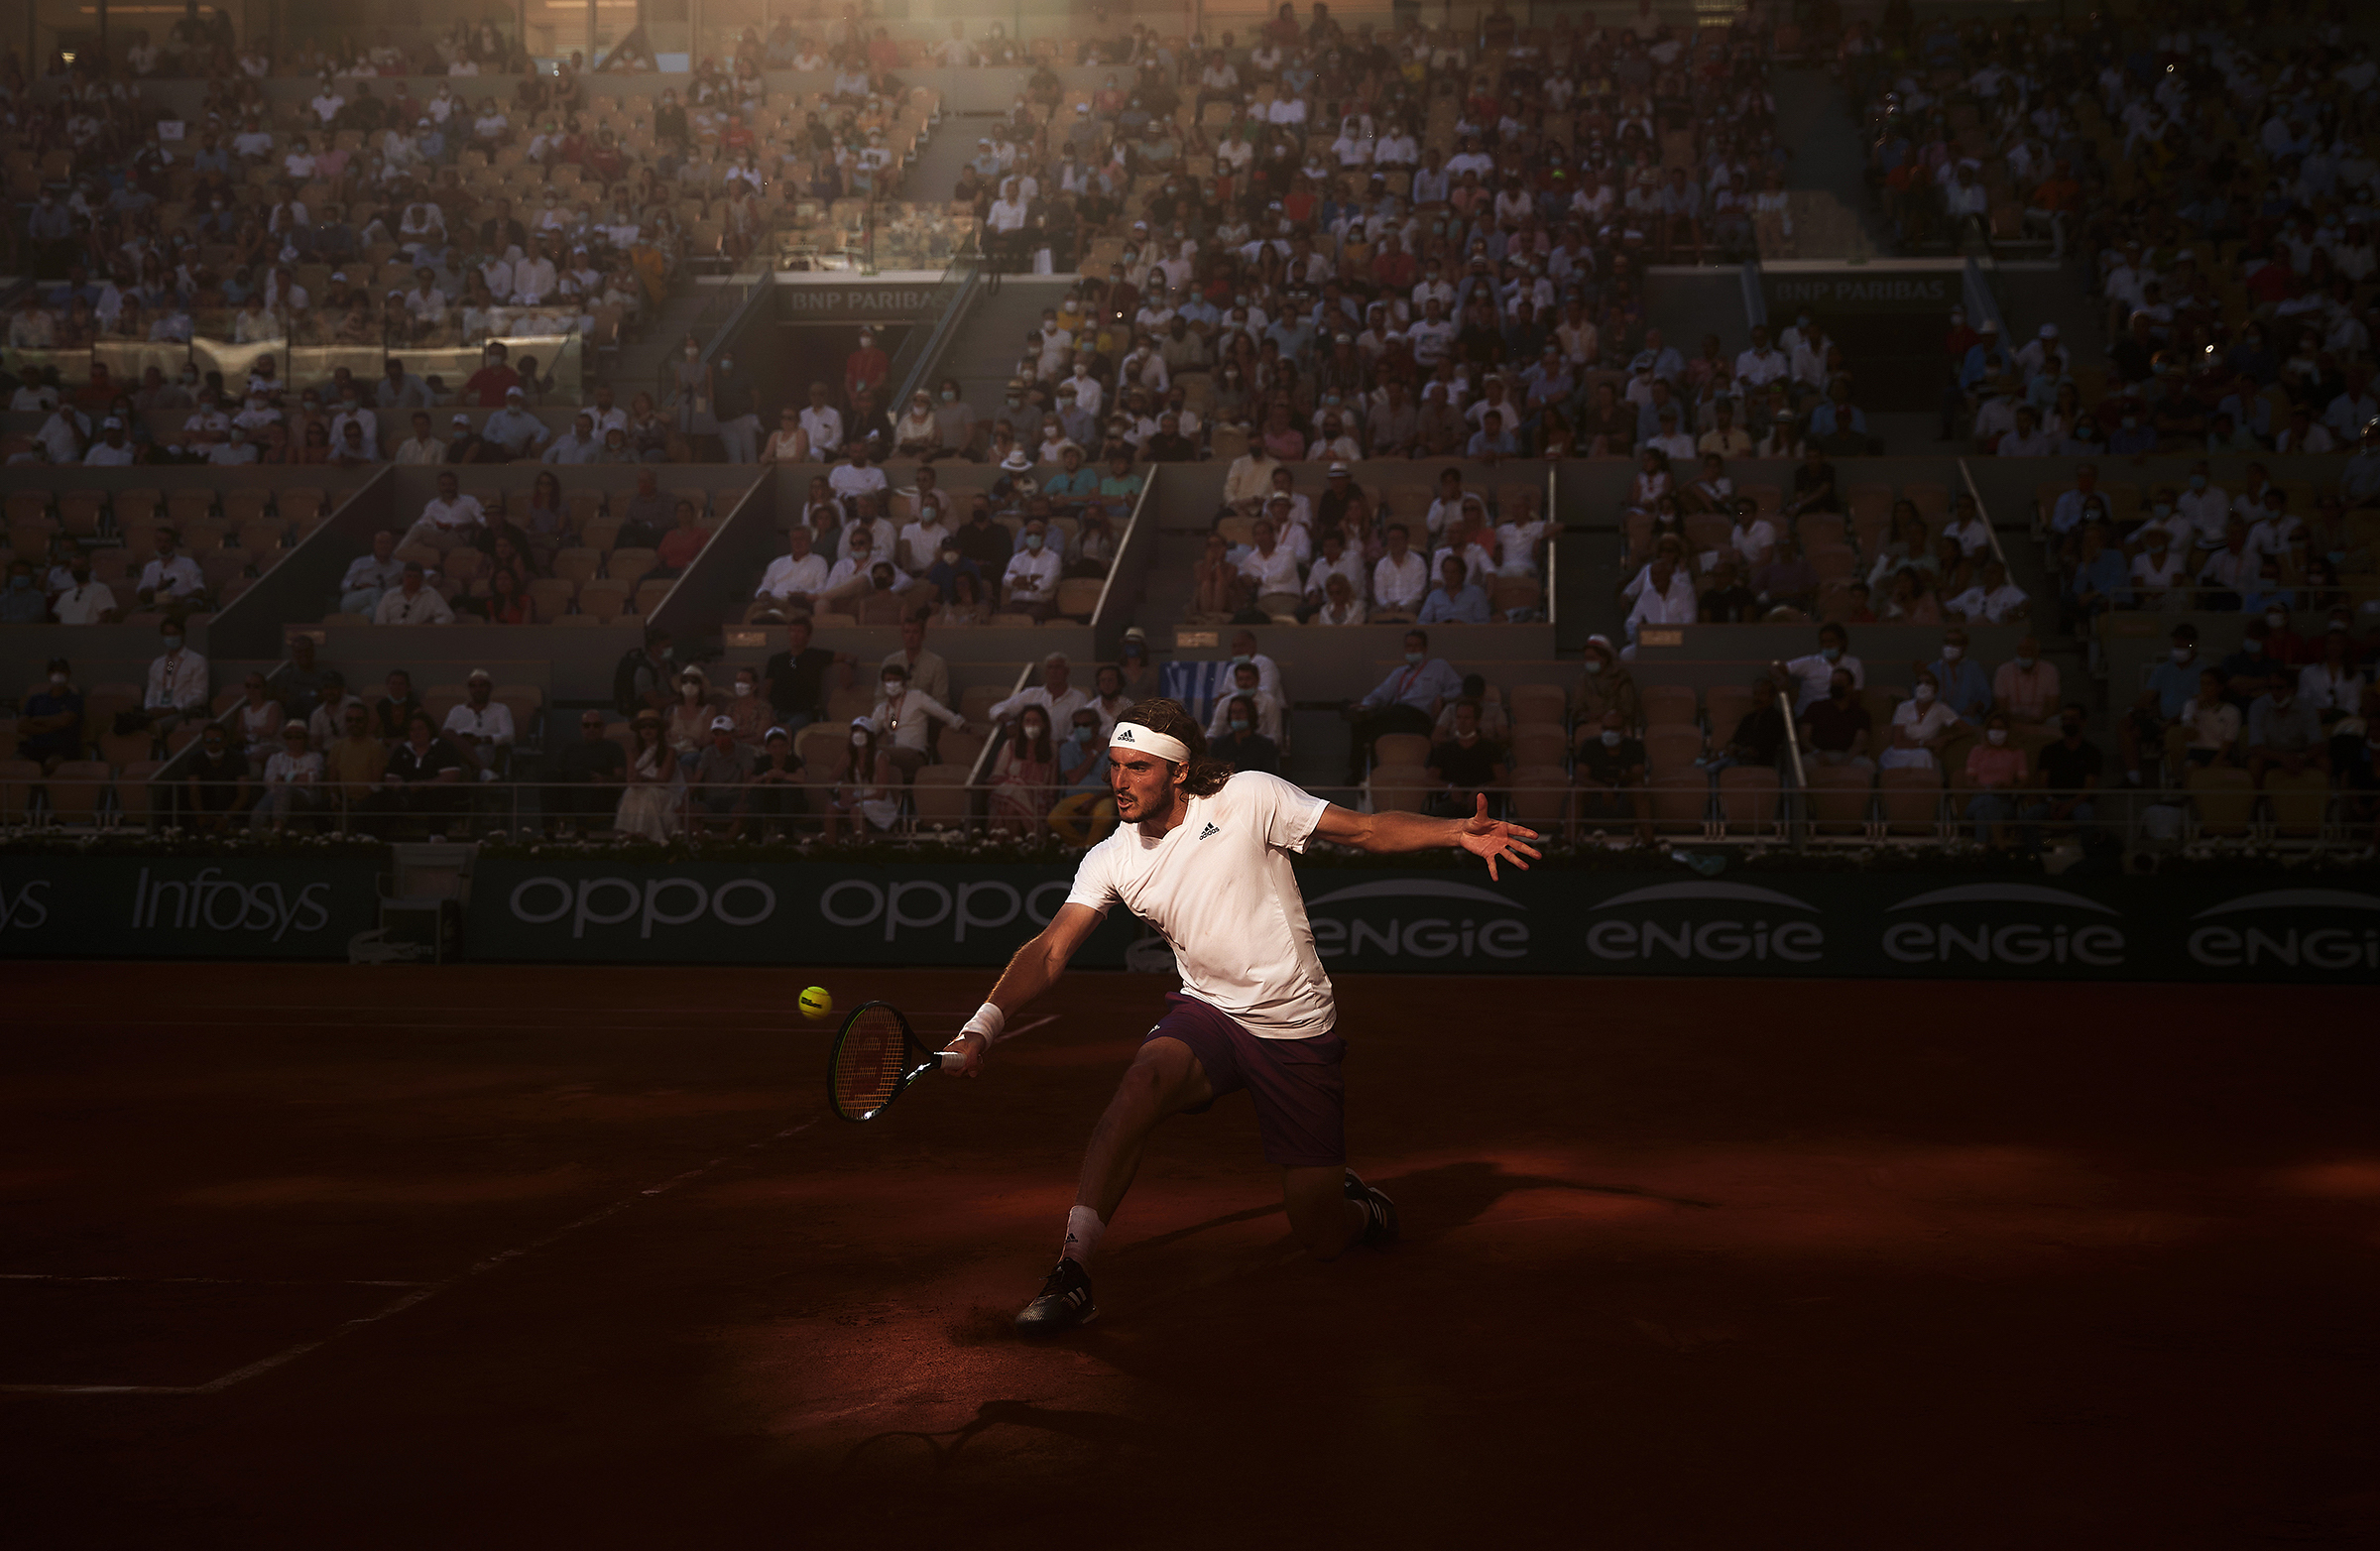 Stefanos Tsitsipas of Greece plays a backhand in his match against Novak Djokovic of Serbia during the Men's Singles Final match of the French Open in Paris on June 13. Djokovic won the final in five sets.